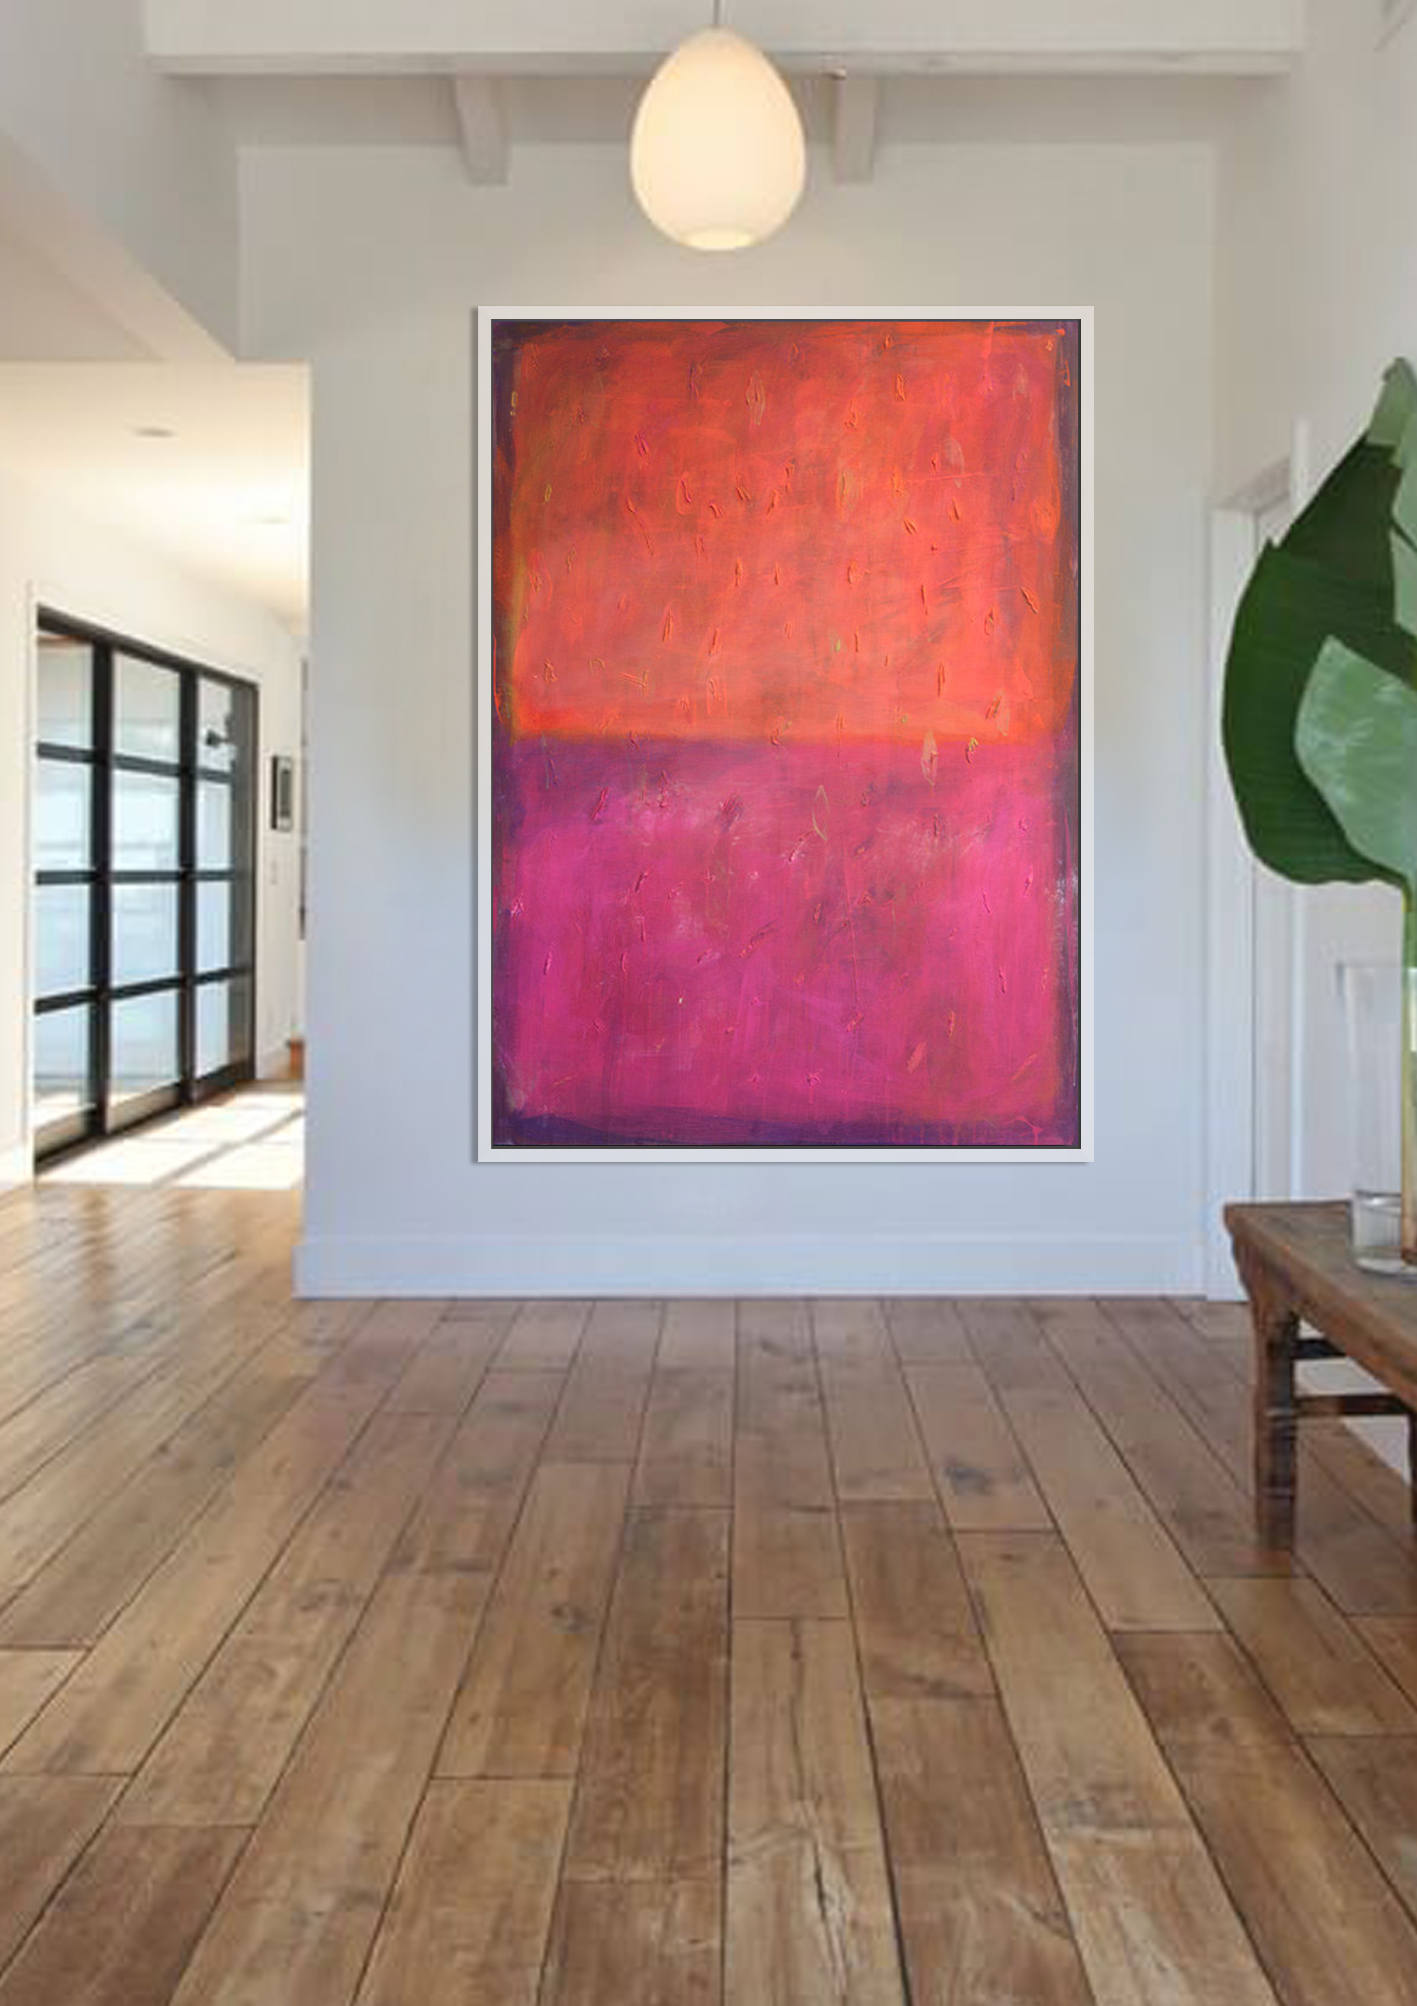 Orange Red Abstract Painting | Original Painting on Canvas Acrylic Oil Contemporary Extra Large Abstract Art | Wall Decor | Texture Painting - camilomattis.com